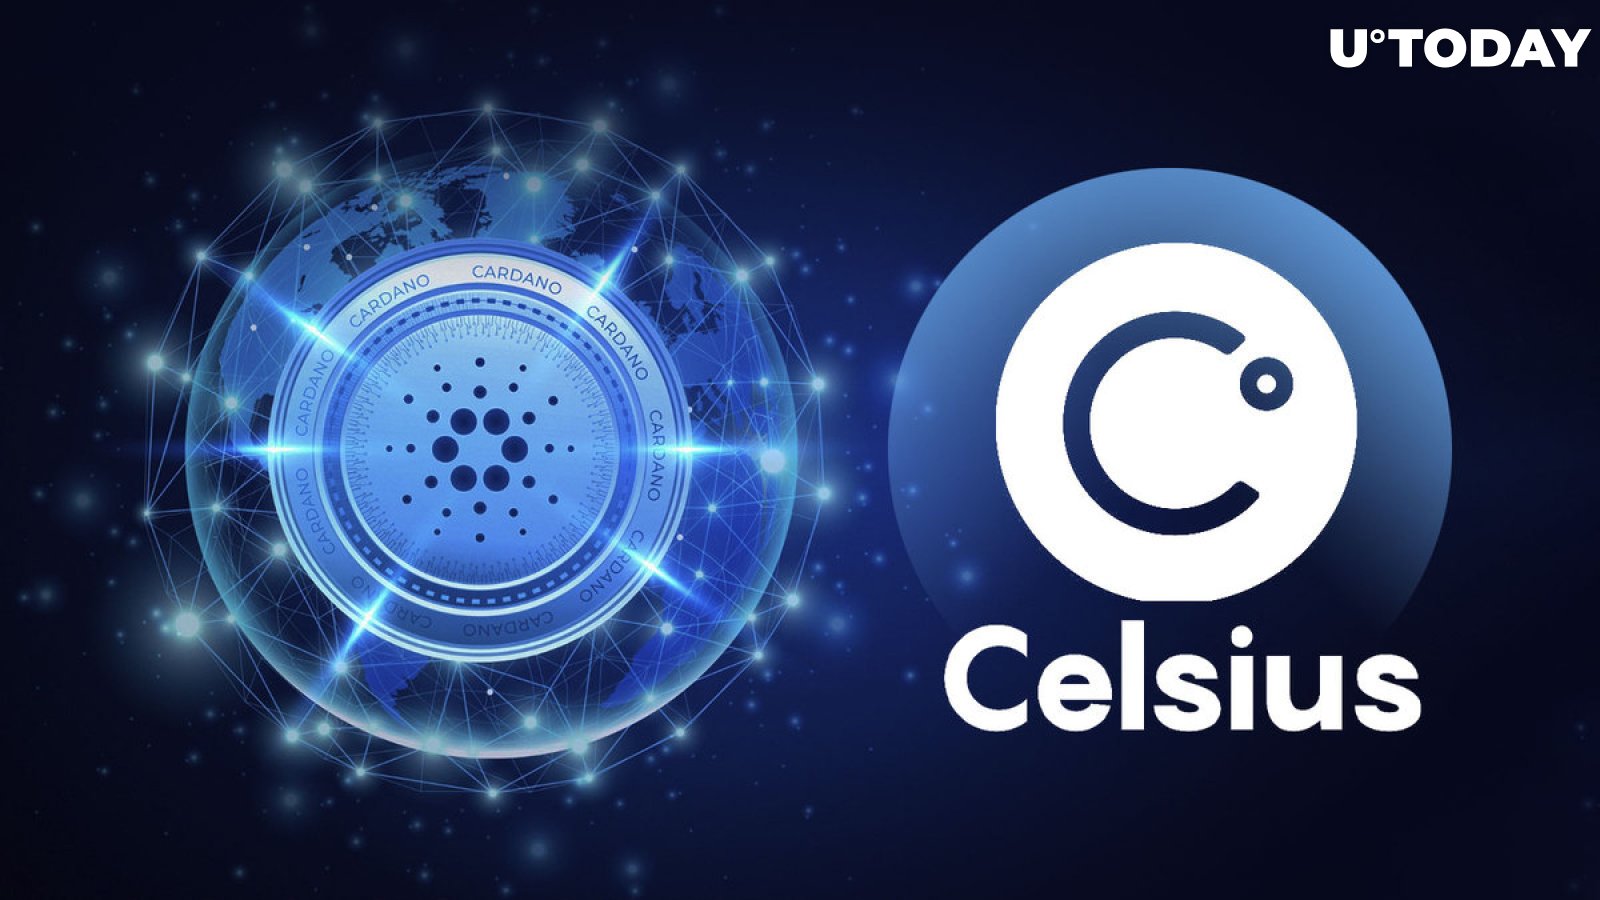 Cardano (ADA) Among Celsius' Sell-off List: What to Expect?